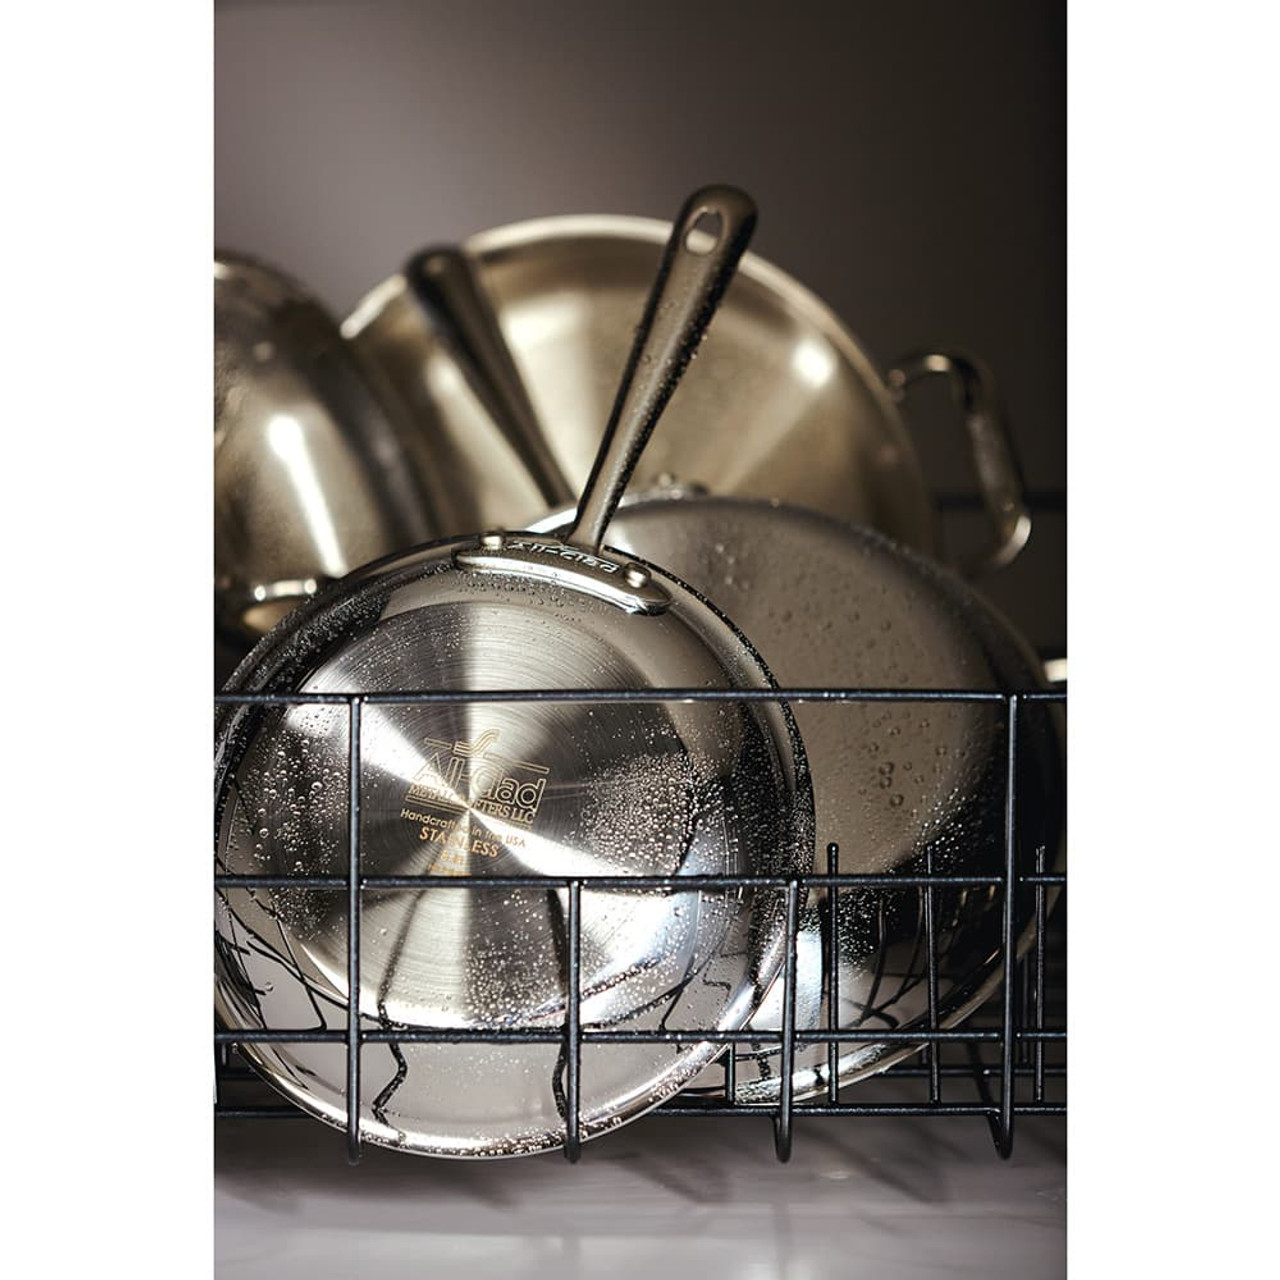 https://cdn11.bigcommerce.com/s-hccytny0od/images/stencil/1280x1280/products/485/8452/all-clad-stainless-steel-fry-pan__06365.1595013857.jpg?c=2?imbypass=on